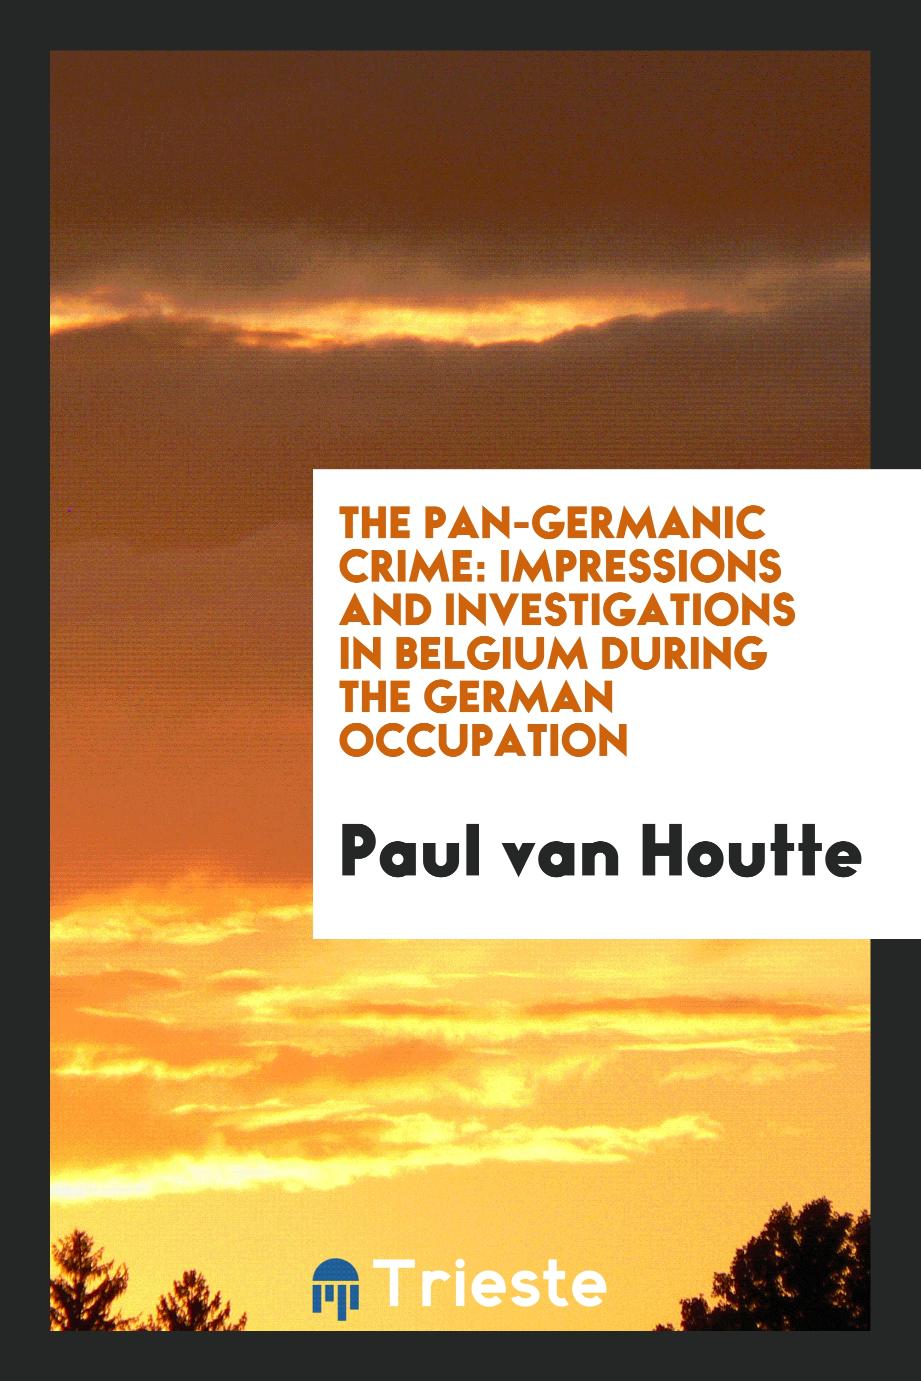 The pan-Germanic crime: impressions and investigations in Belgium during the German occupation